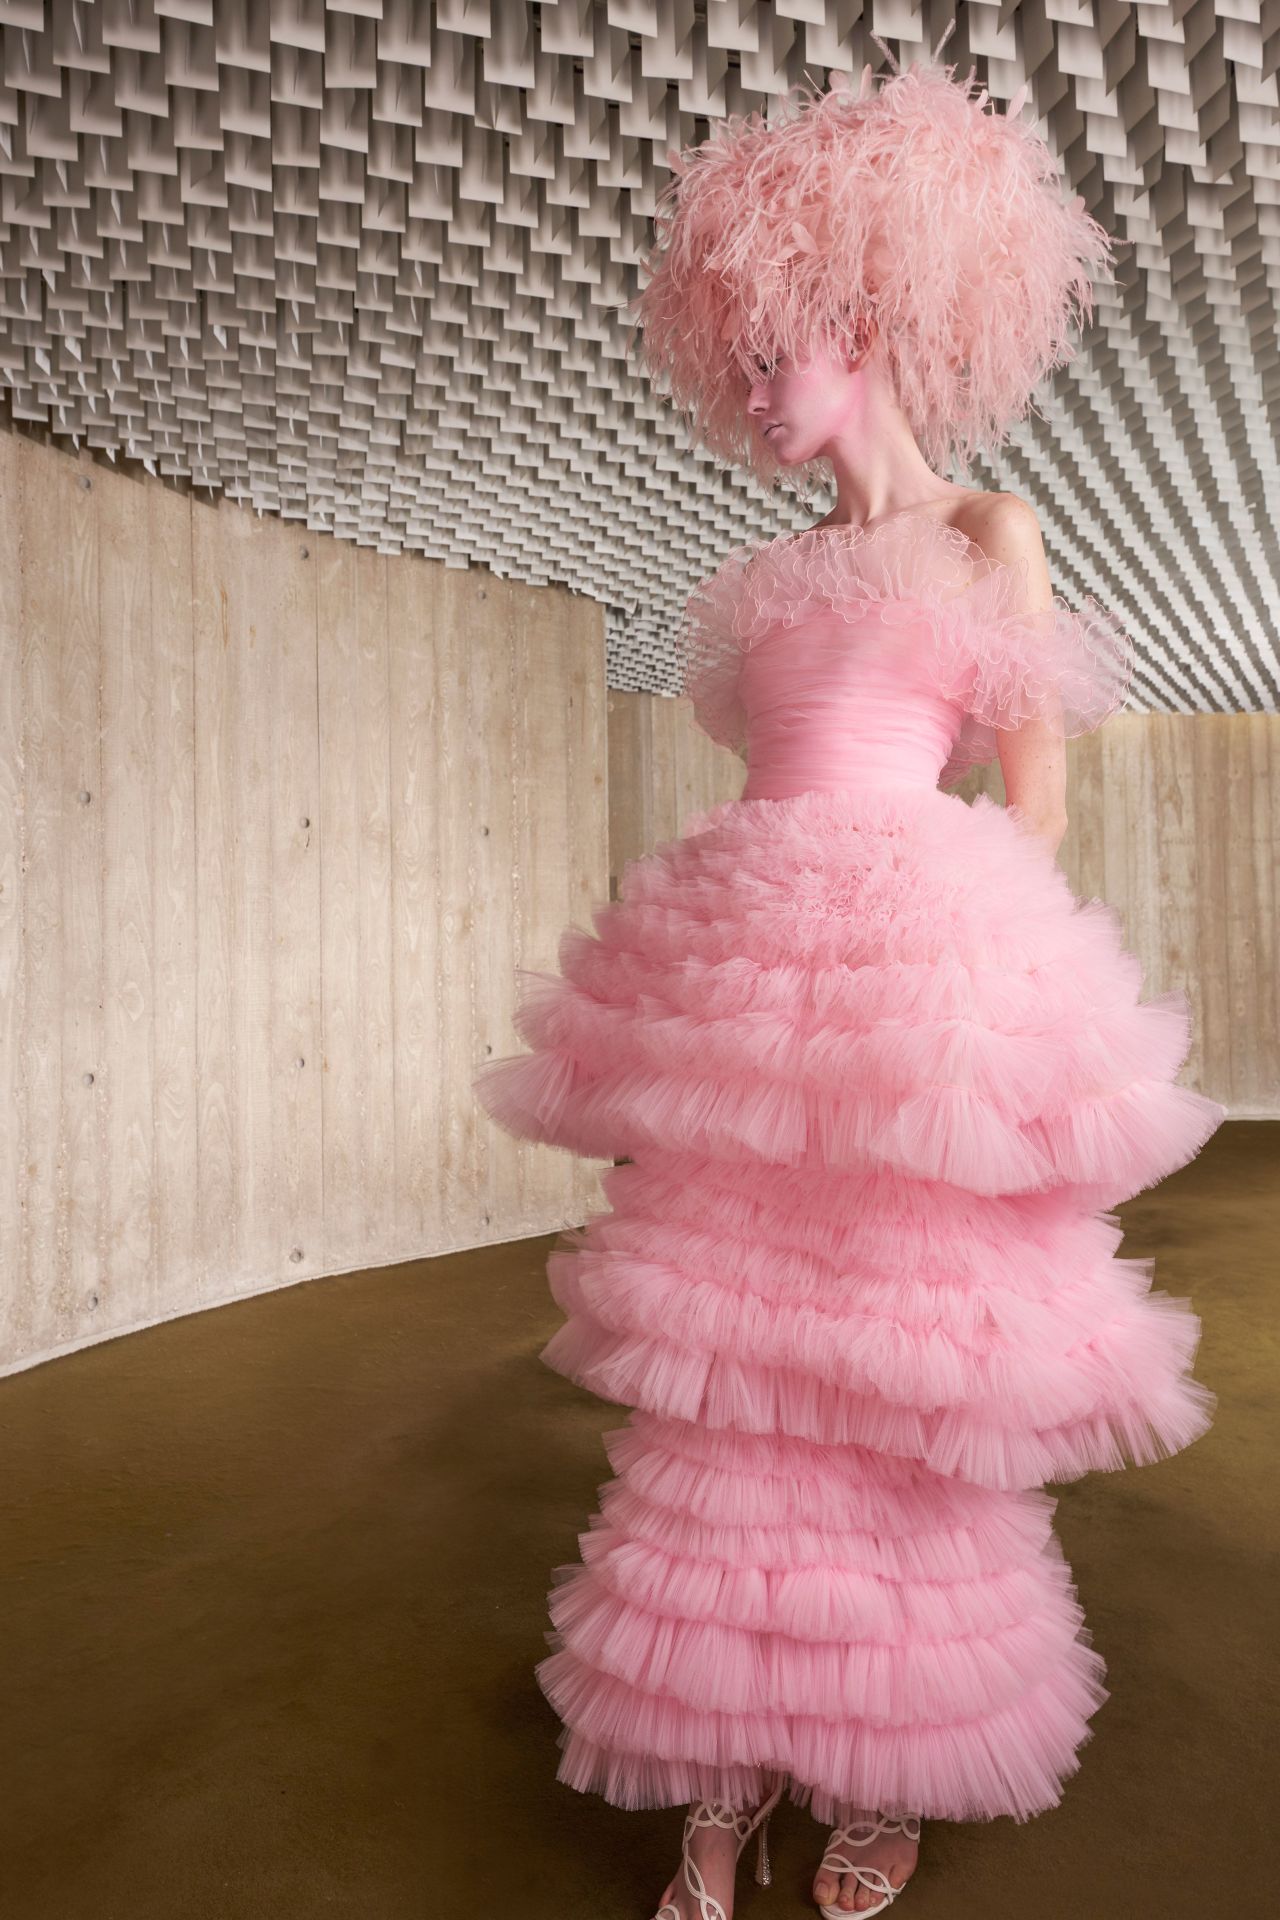 In Giambattista Valli's new collection, "Paris is burning with it's renewed vitality," according to the show notes.<br />